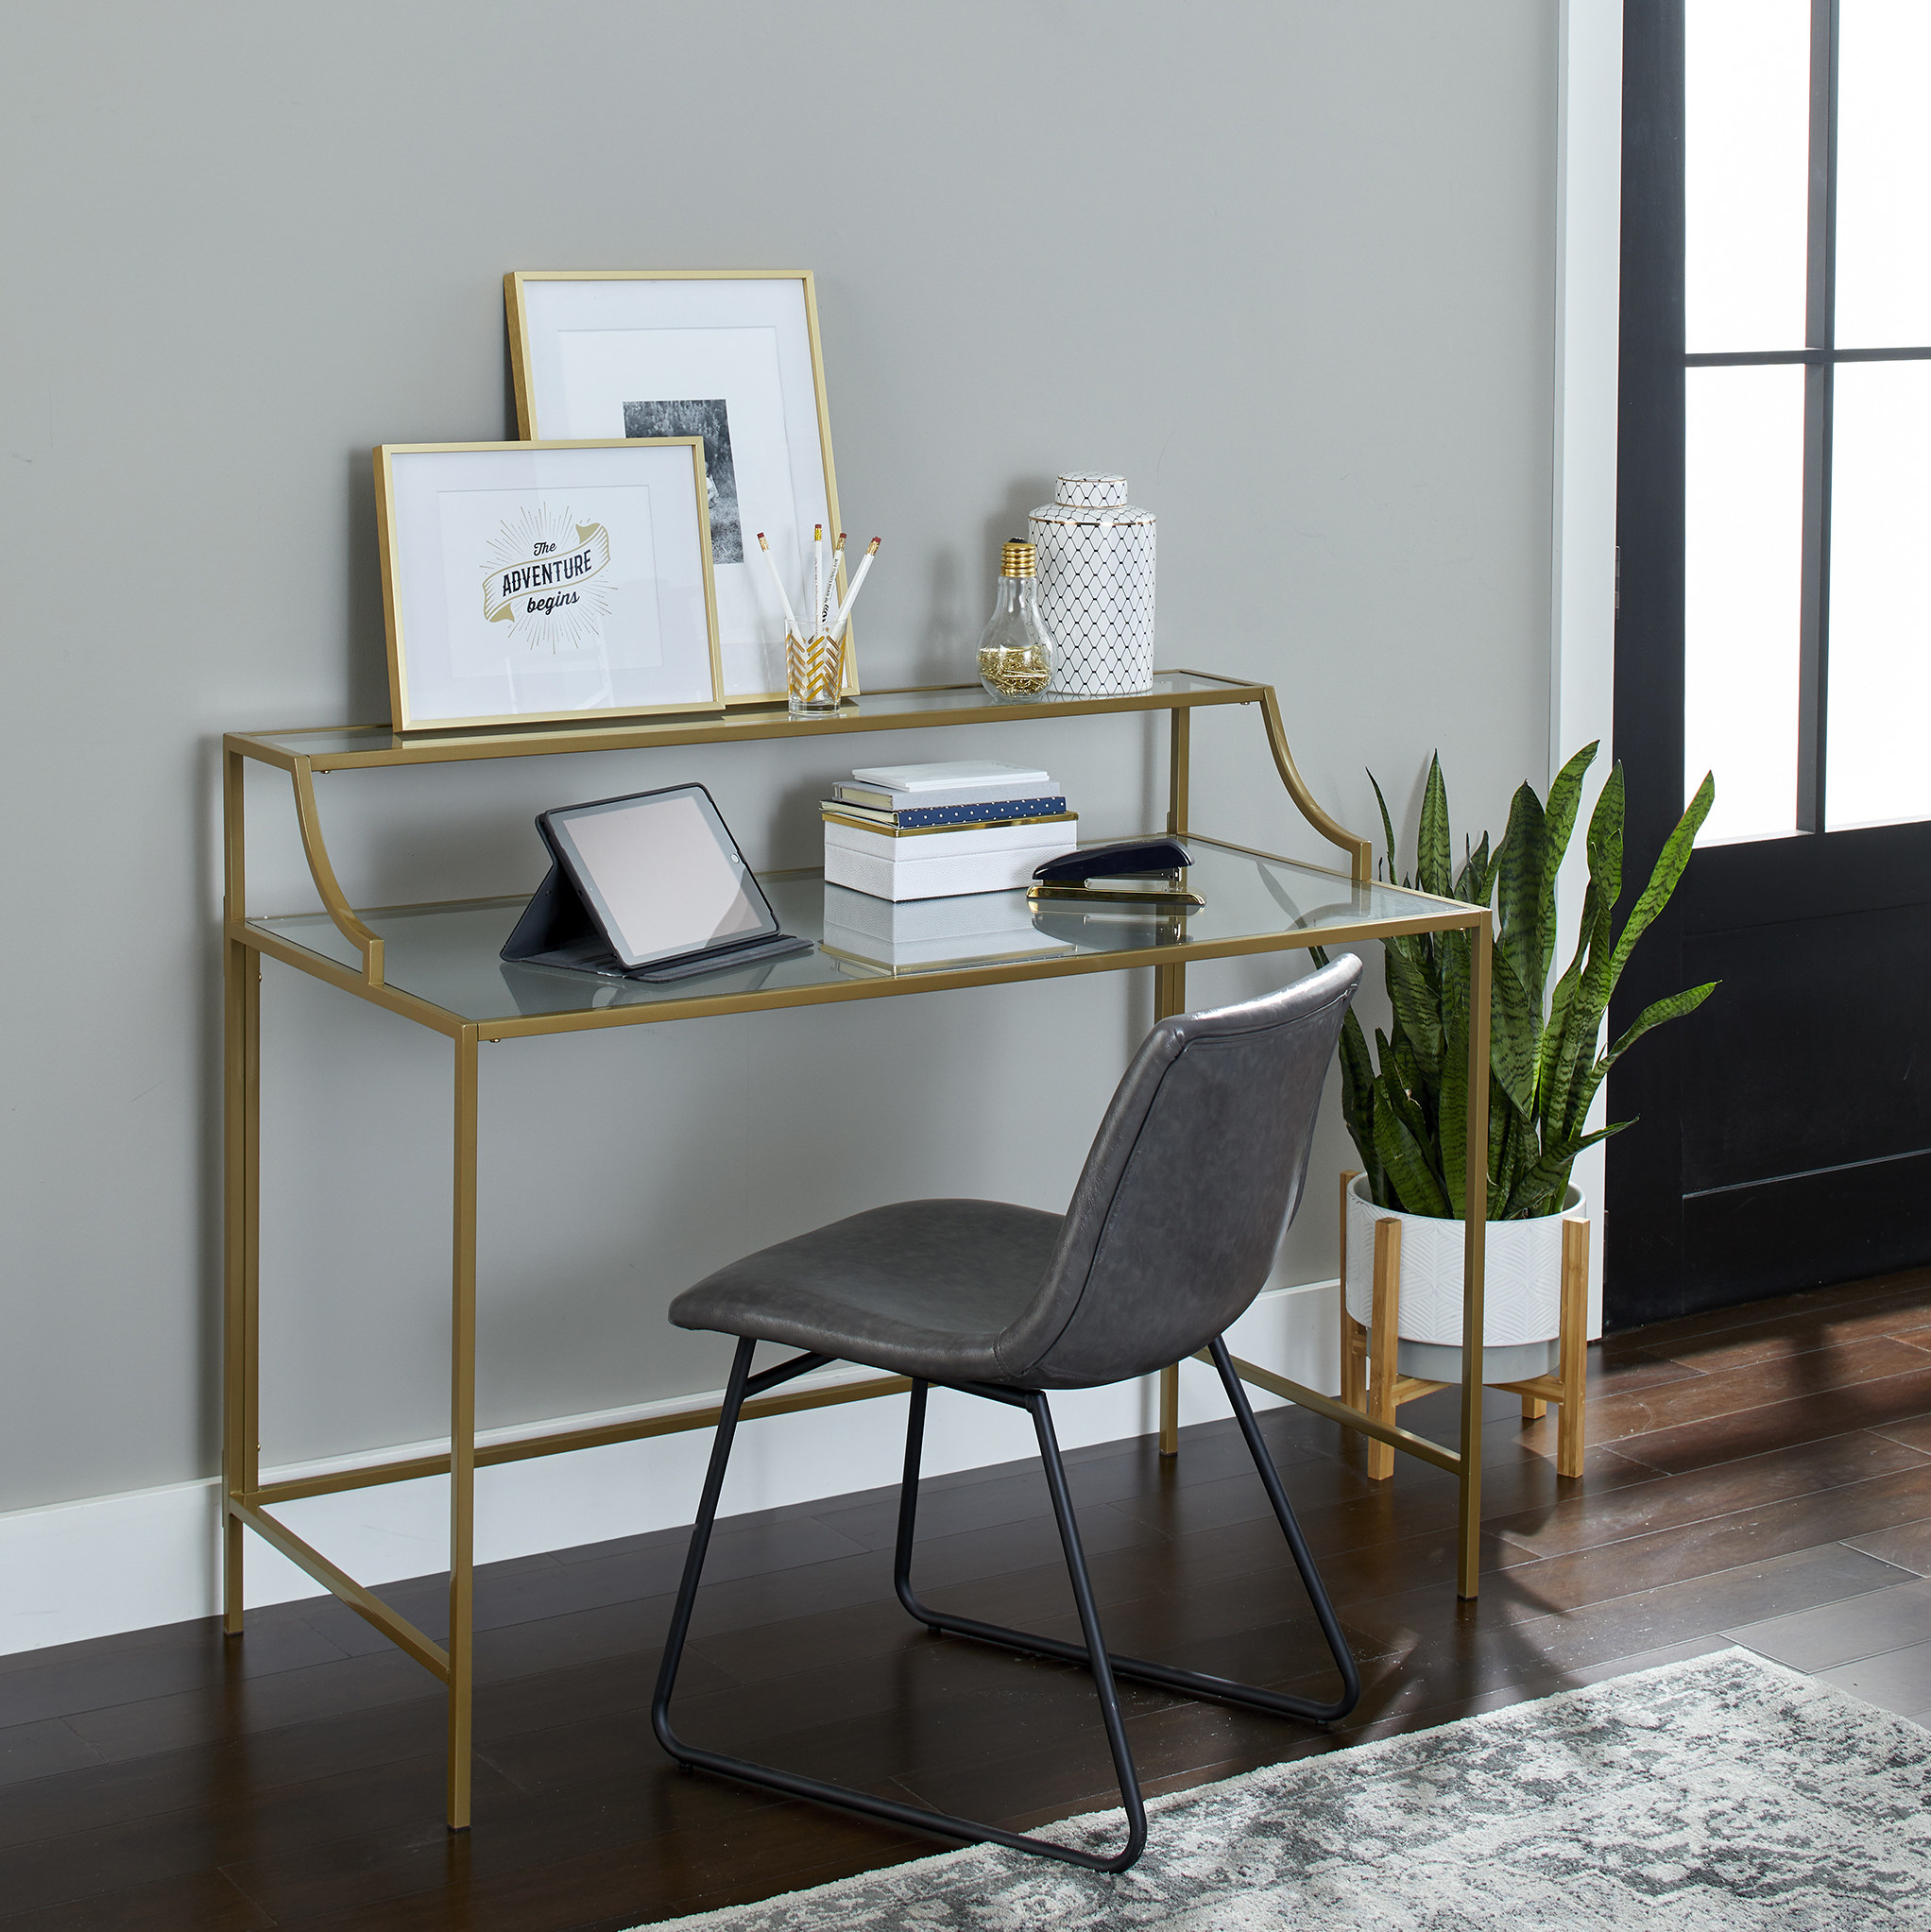 the glass desk with gold detailing,  a gray chair, and an ipad and other accessories on it